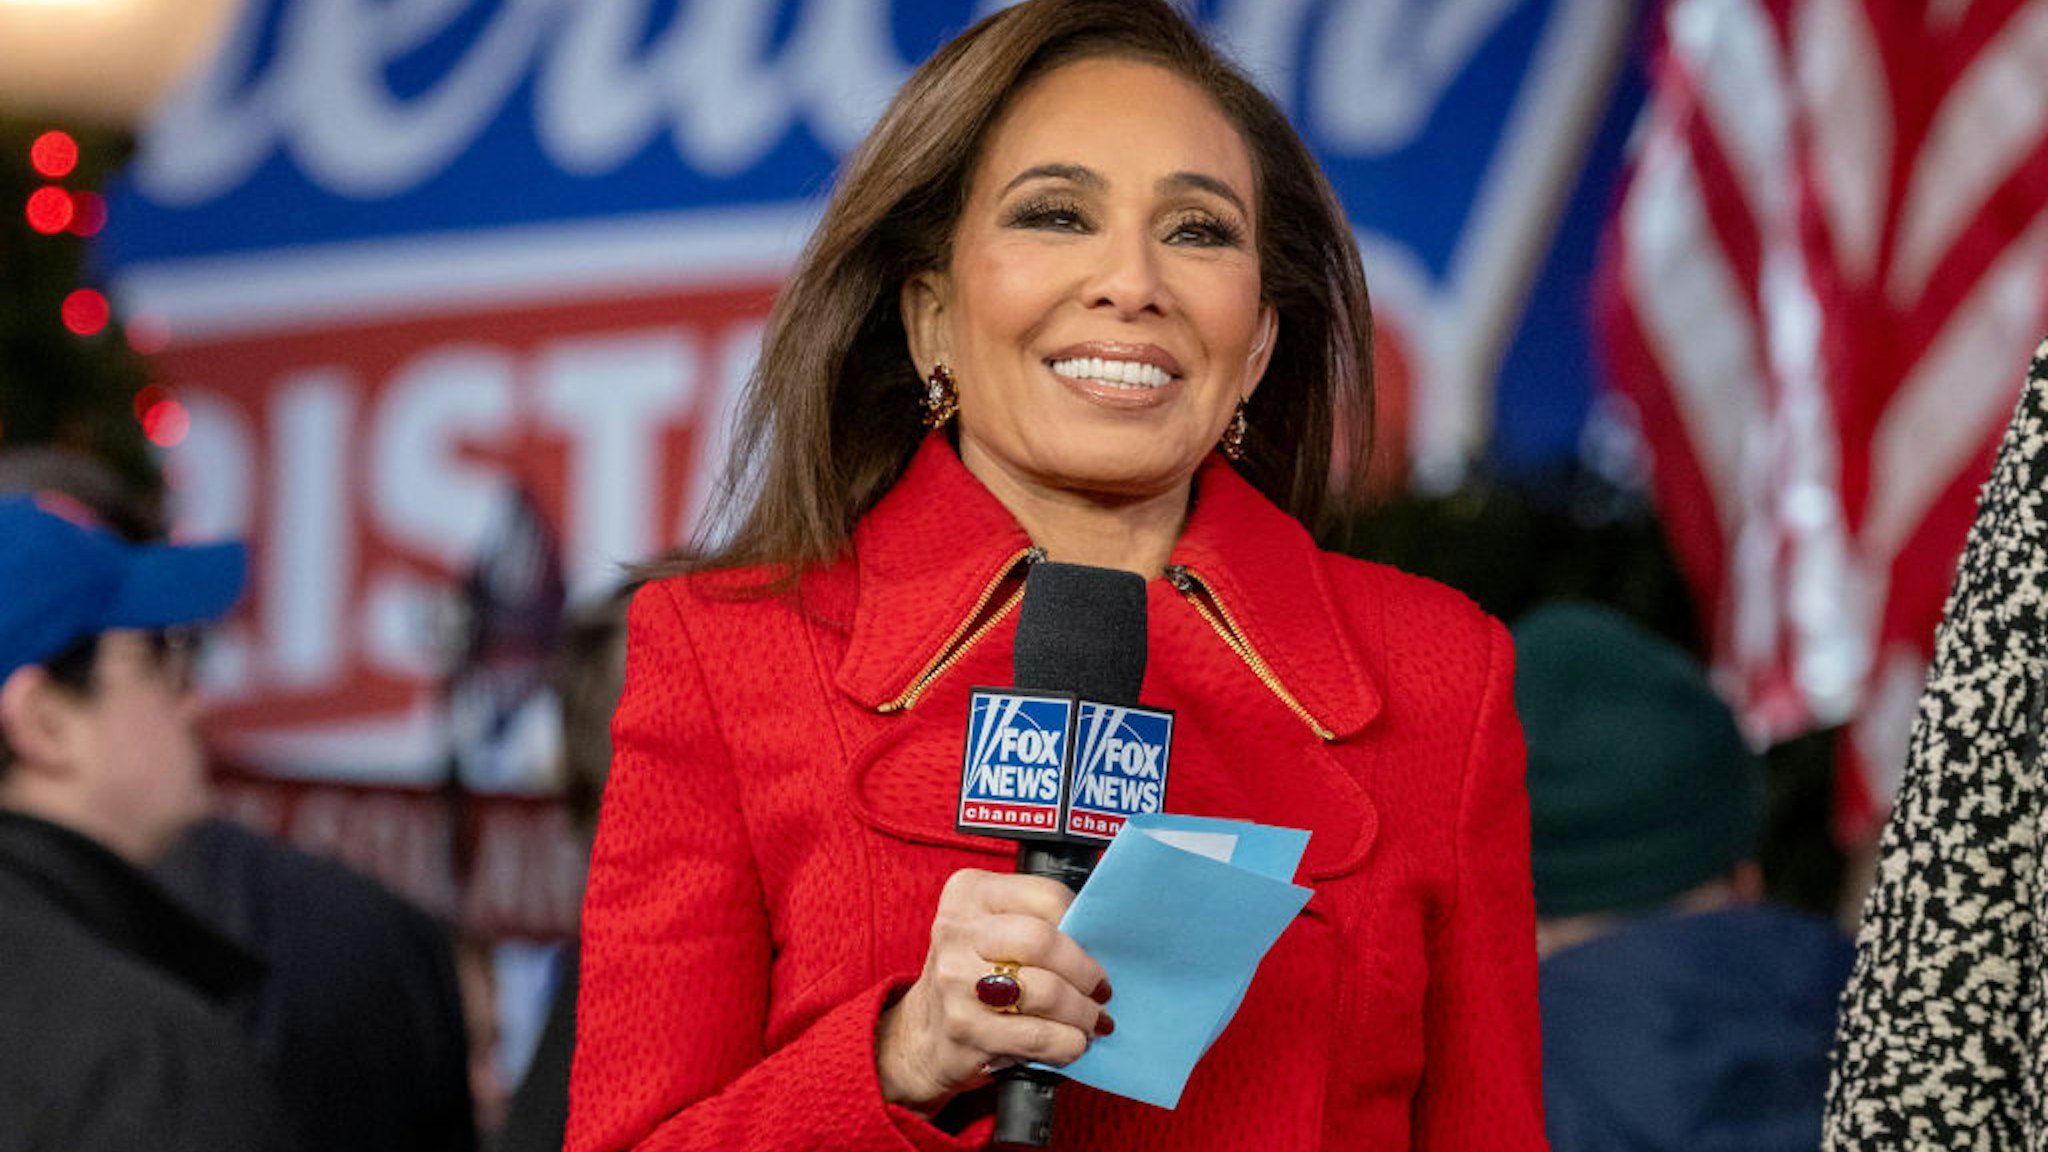 NEW YORK, NEW YORK - DECEMBER 09: Jeanine Pirro attends the new All-American Christmas Tree lighting outside News Corporation at Fox Square on December 9, 2021 in New York City. The original 50-foot tree displayed on FOX Square in Midtown Manhattan was allegedly set on fire by a man during the early morning hours of December 8, 2021. He was later arrested. (Photo by Alexi Rosenfeld/Getty Images)